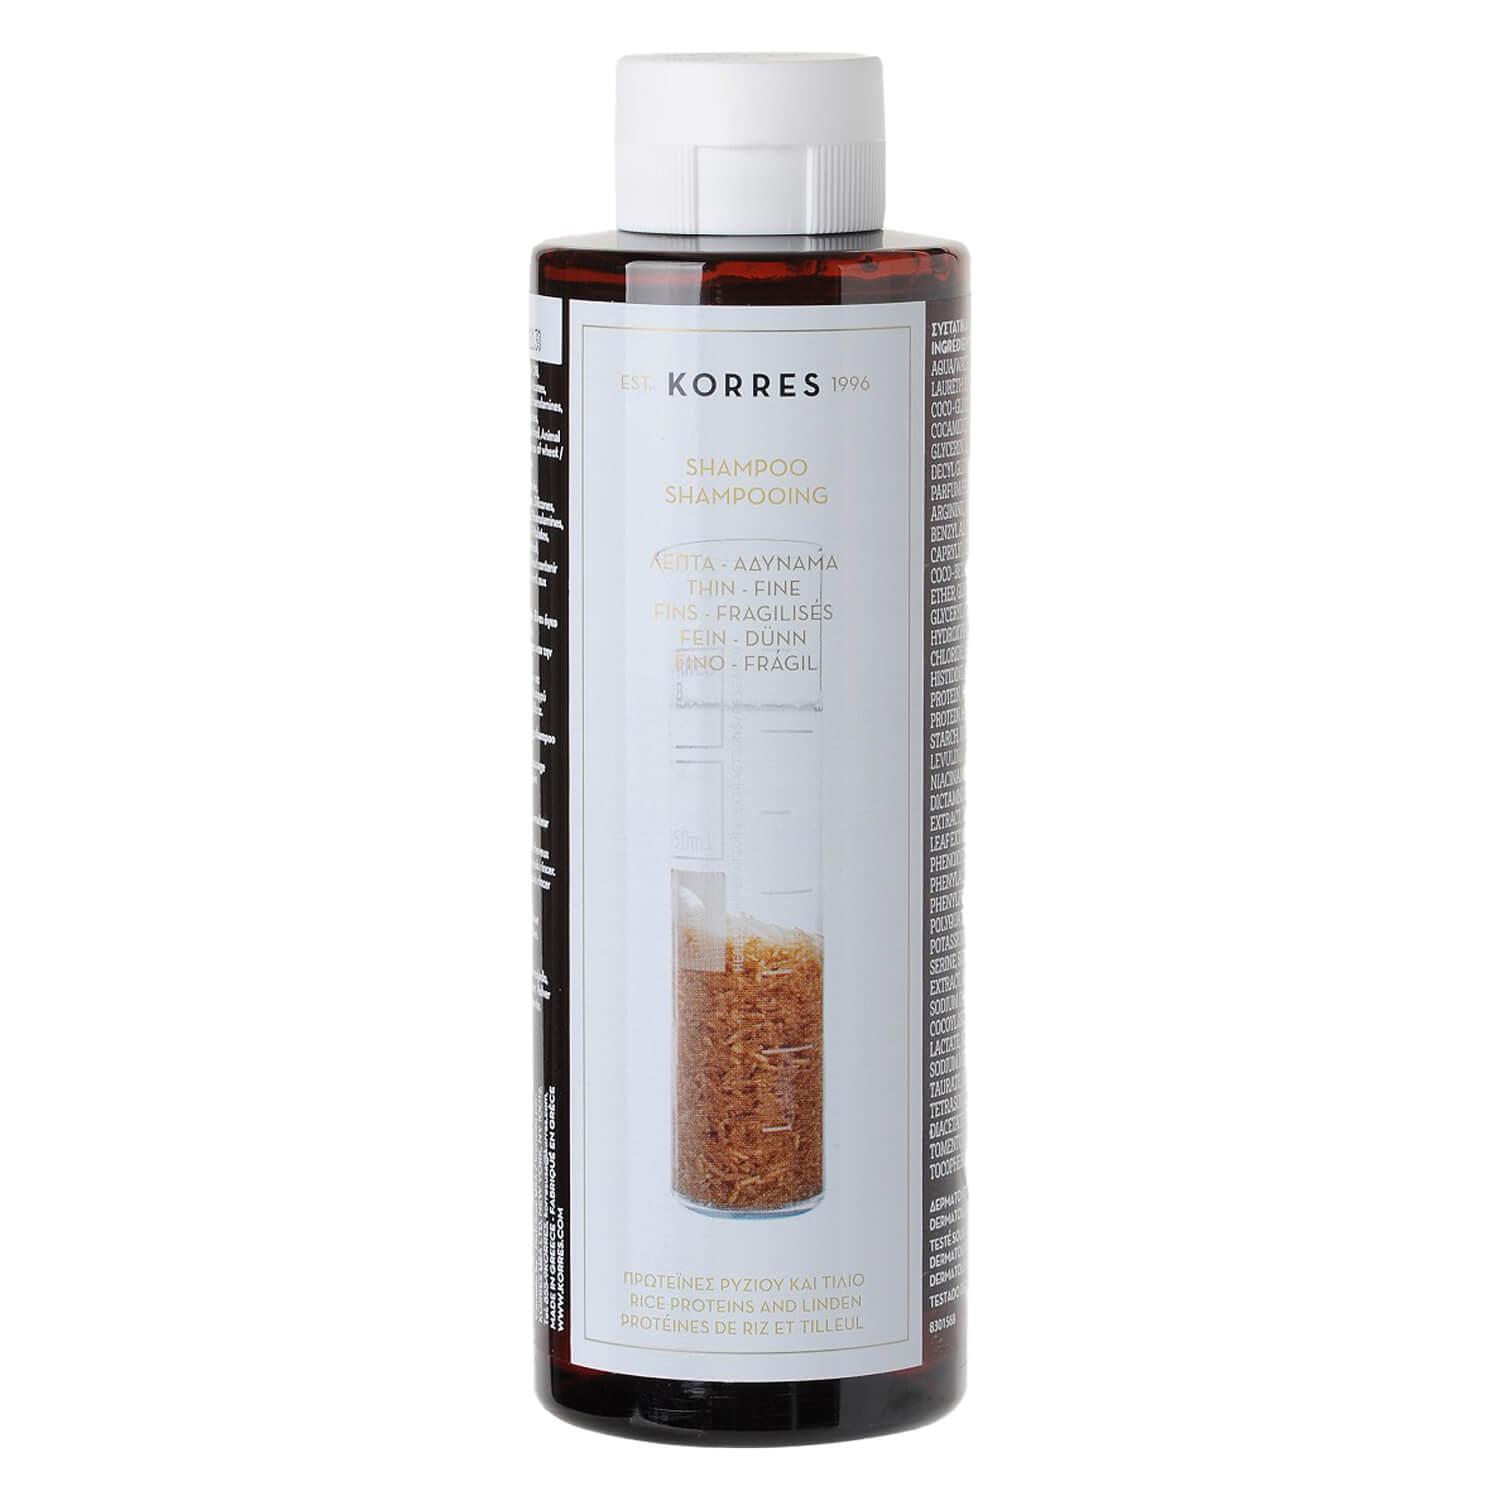 Korres Haircare - Rice Proteins & Linden Shampoo